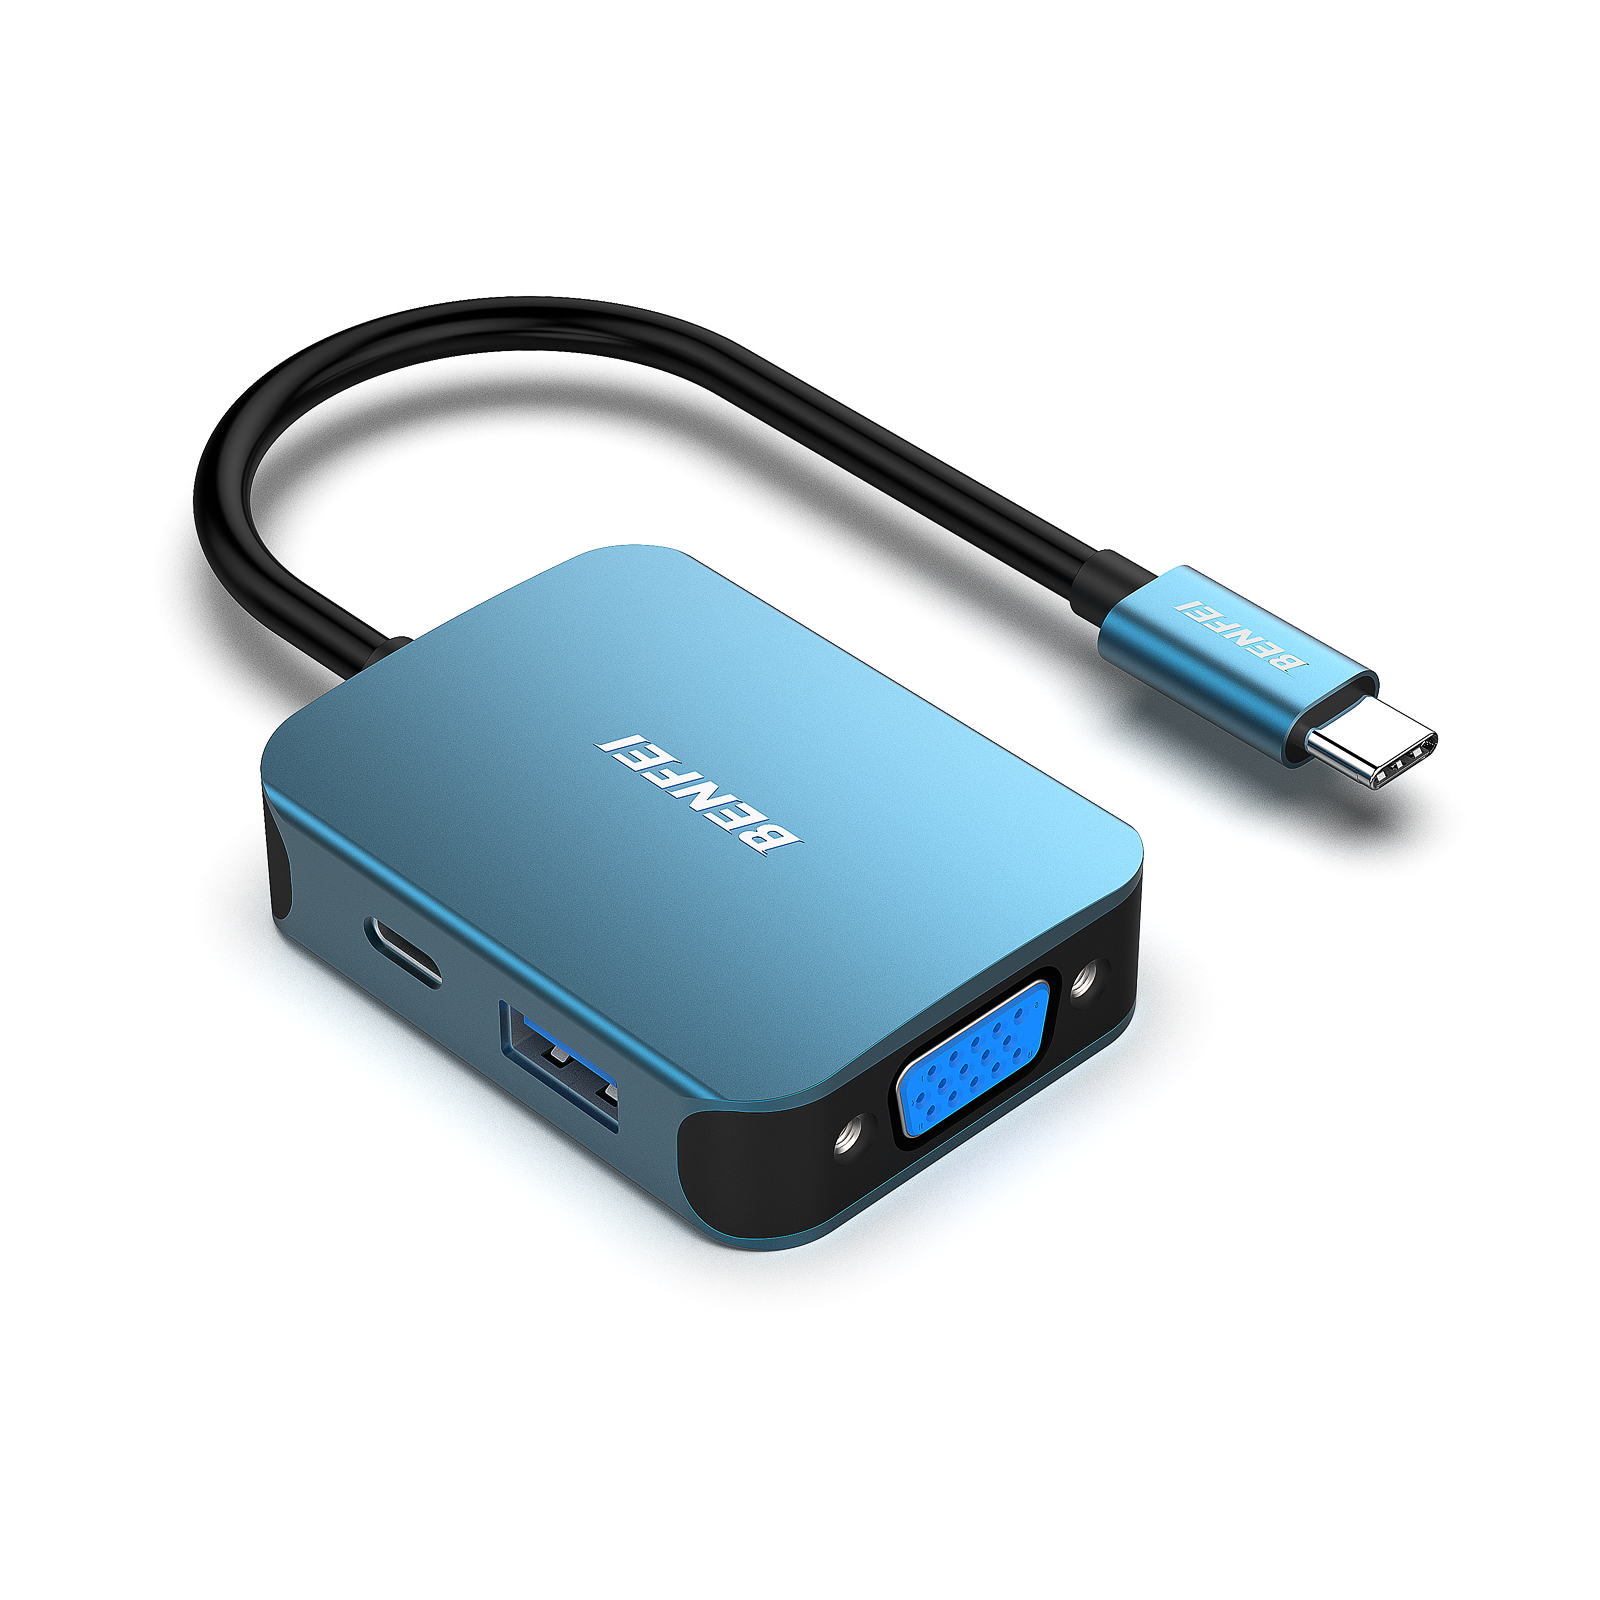 BENFEI 2in1 USB-C/USB 3.0 to Ethernet Adapter with 3*USB 3.0 Ports